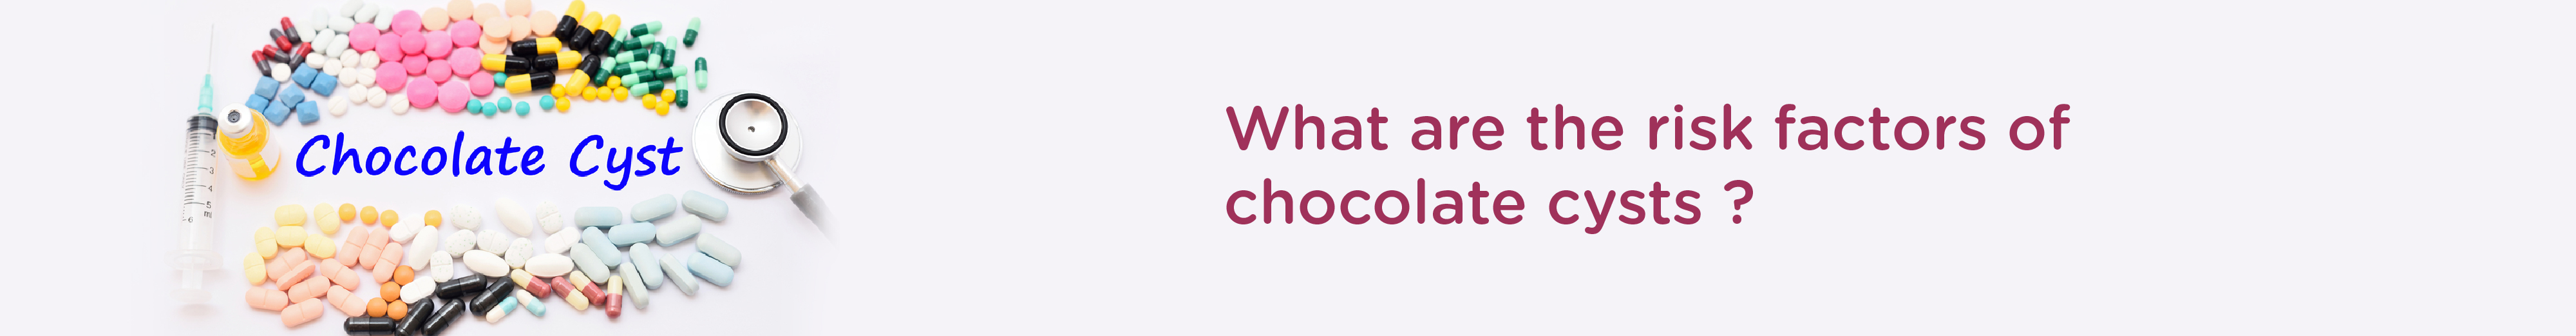 What are the Chocolate Cysts Risk Factors?